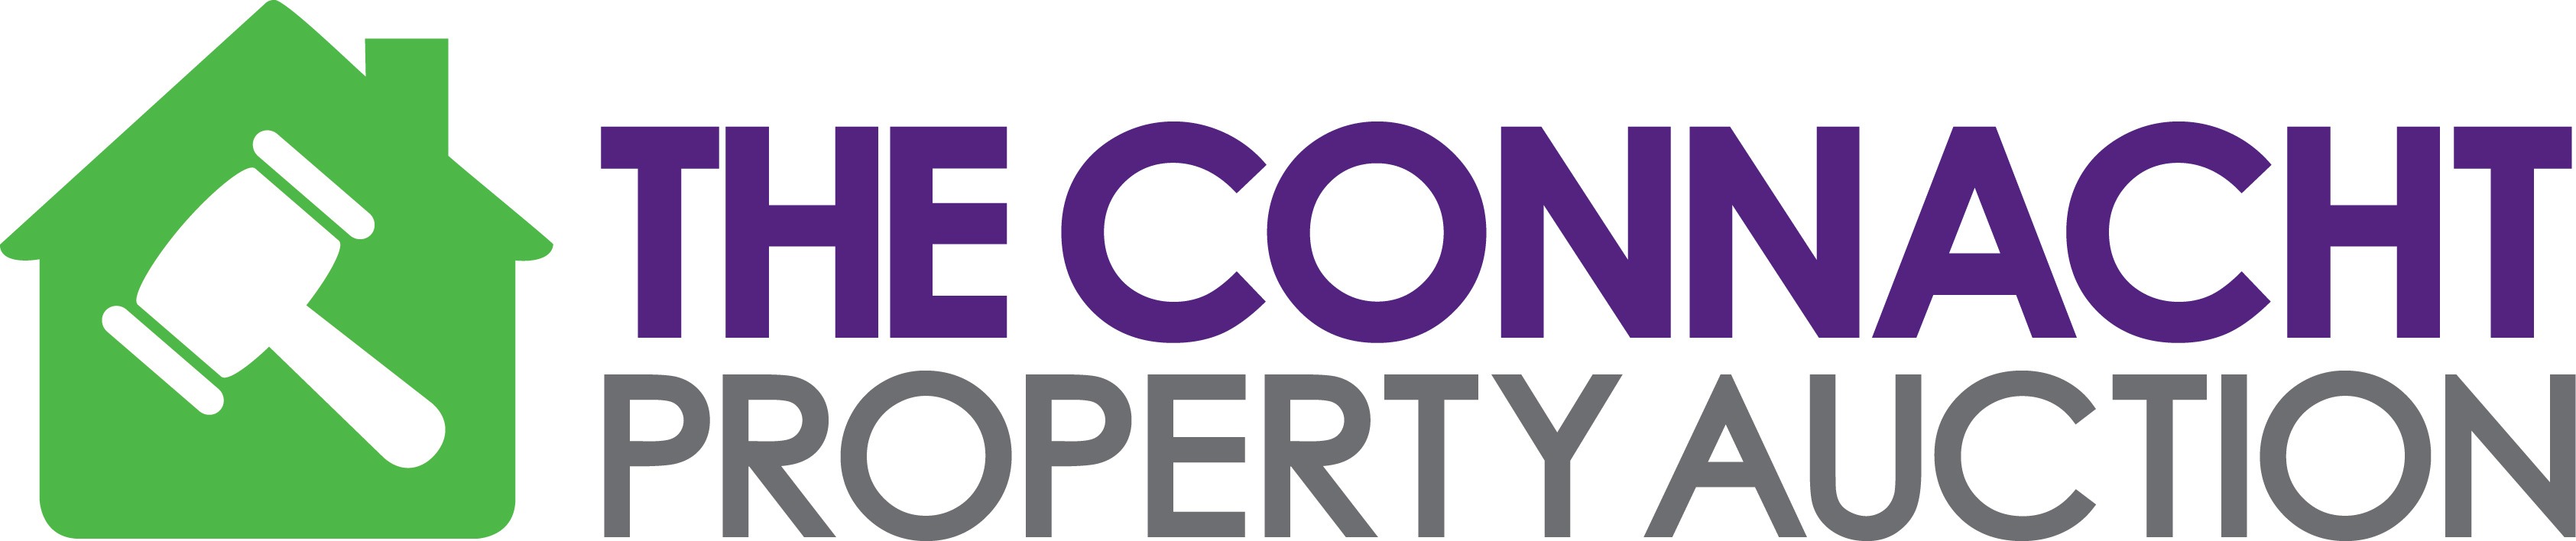 logo connaught property